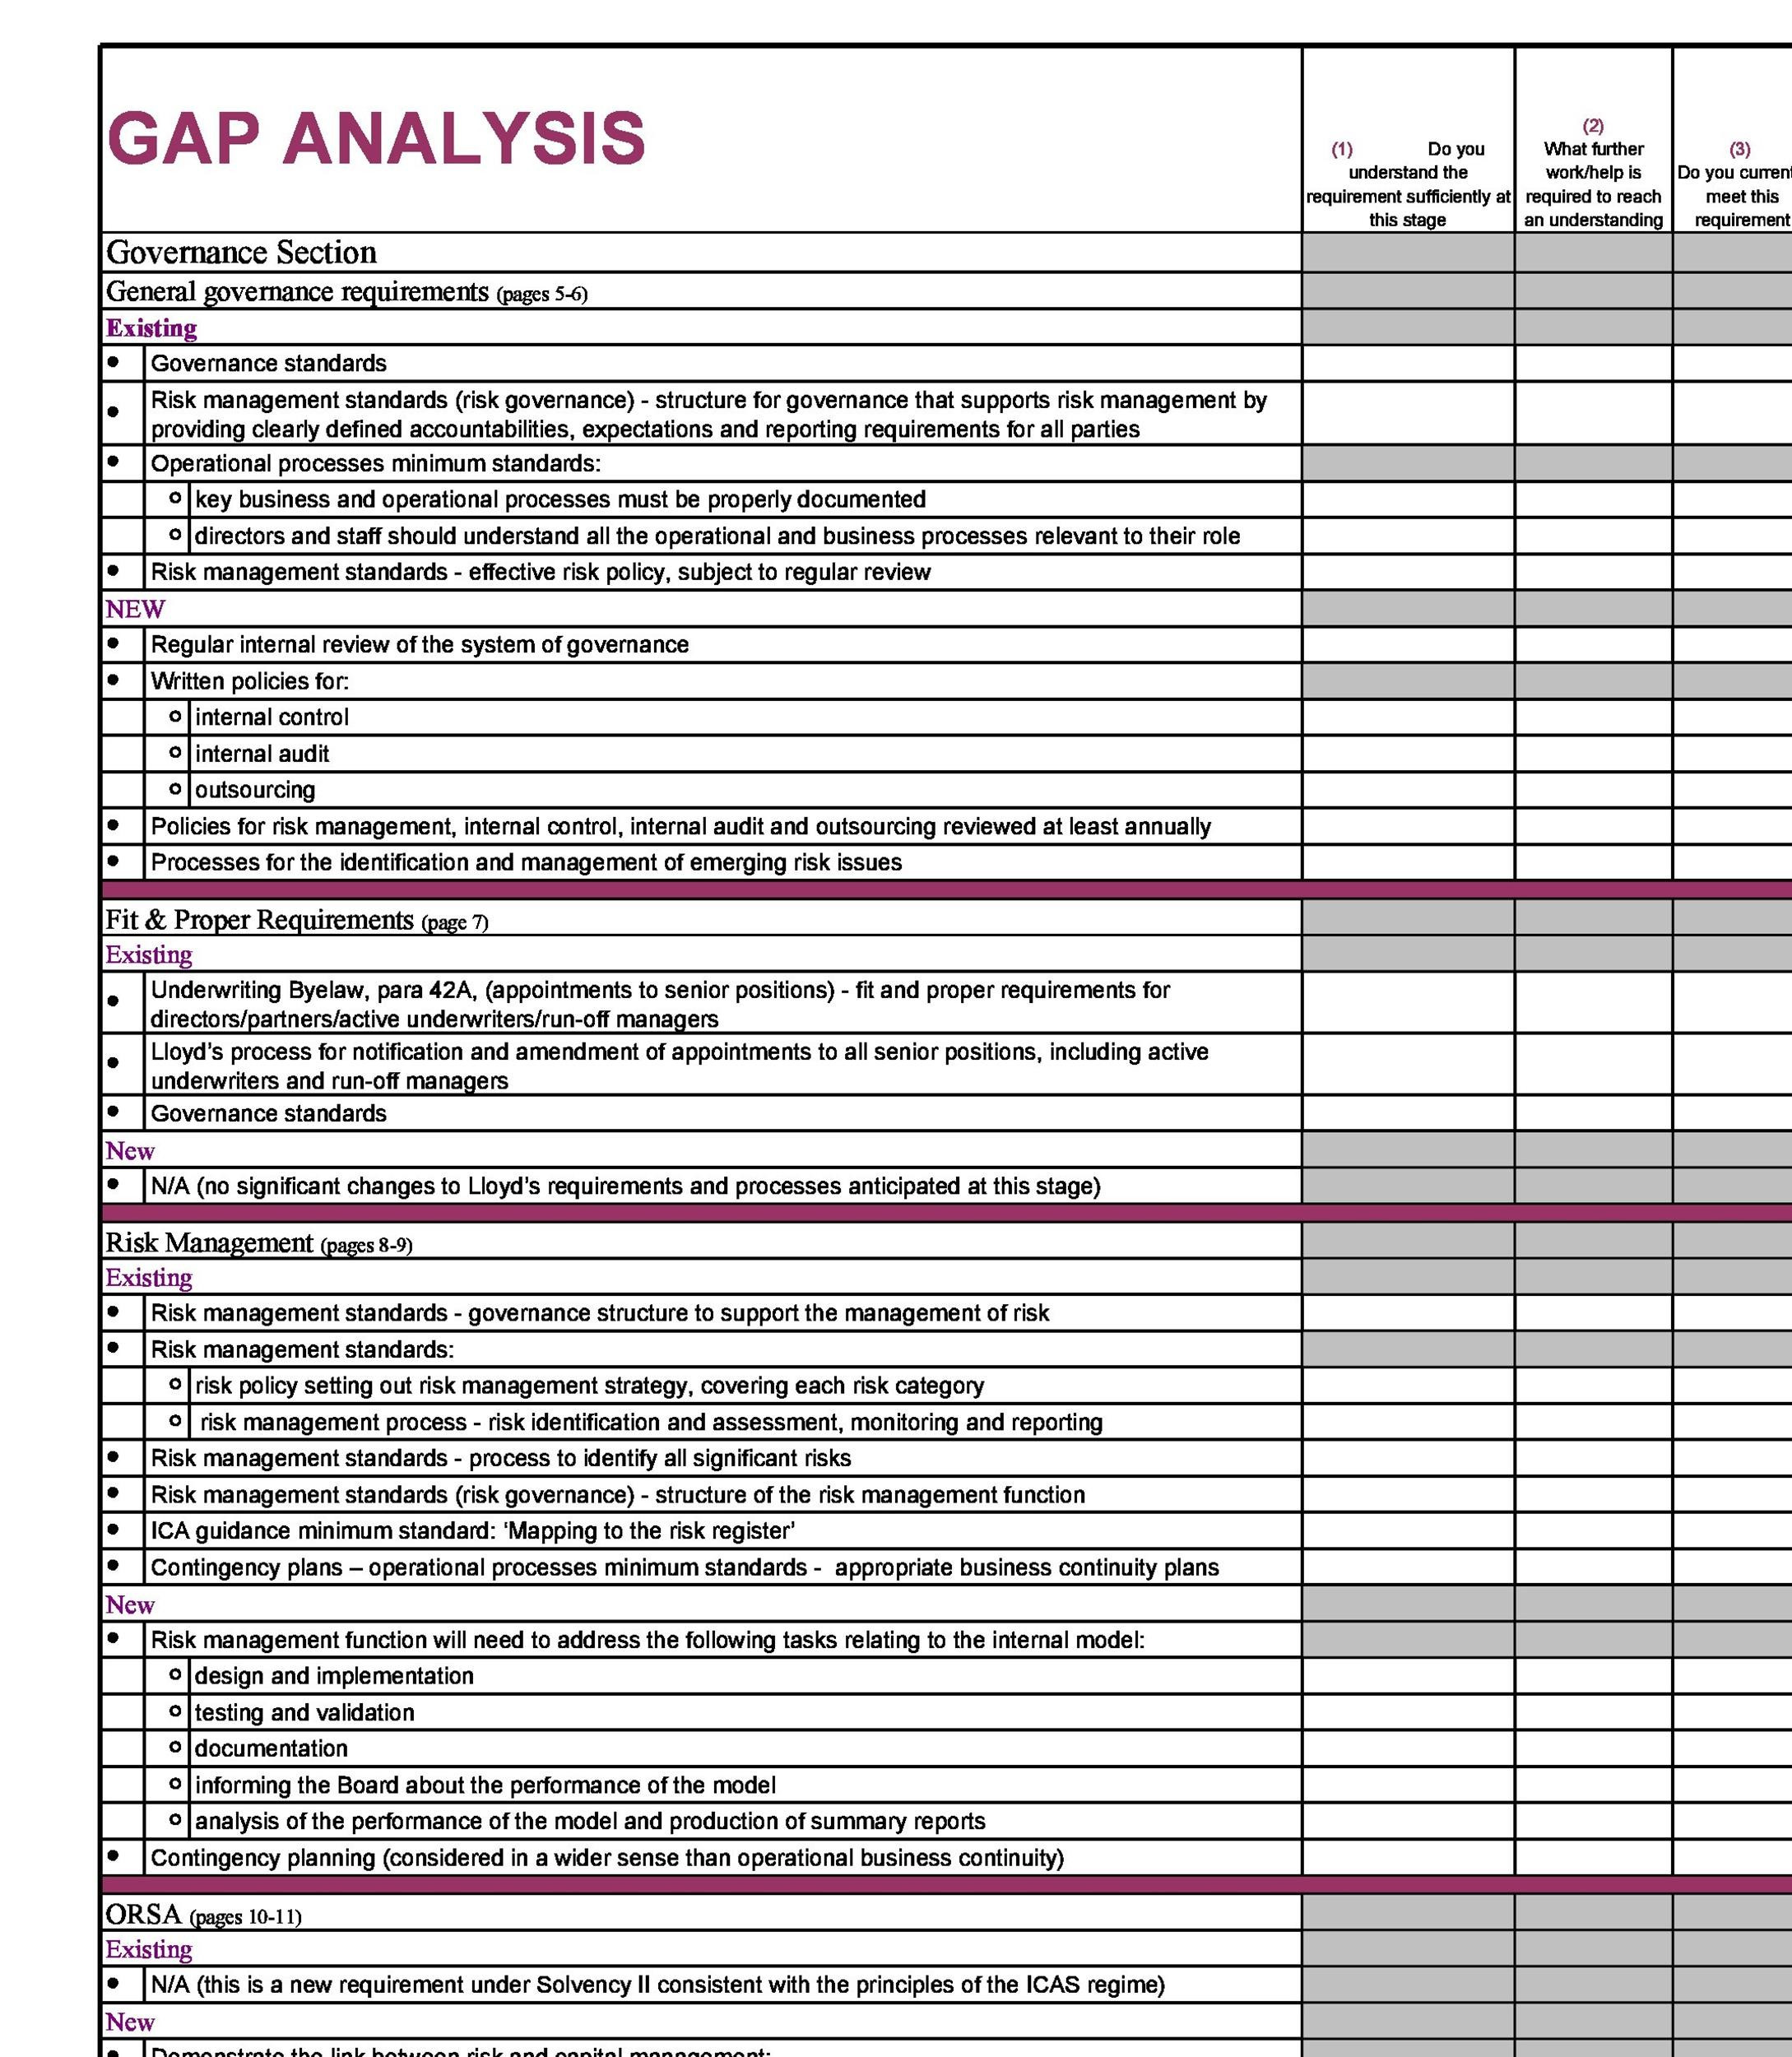 Gap Analysis On Business Requitement Resume Samples 40 Gap Analysis Templates & Examples (word, Excel, Pdf)